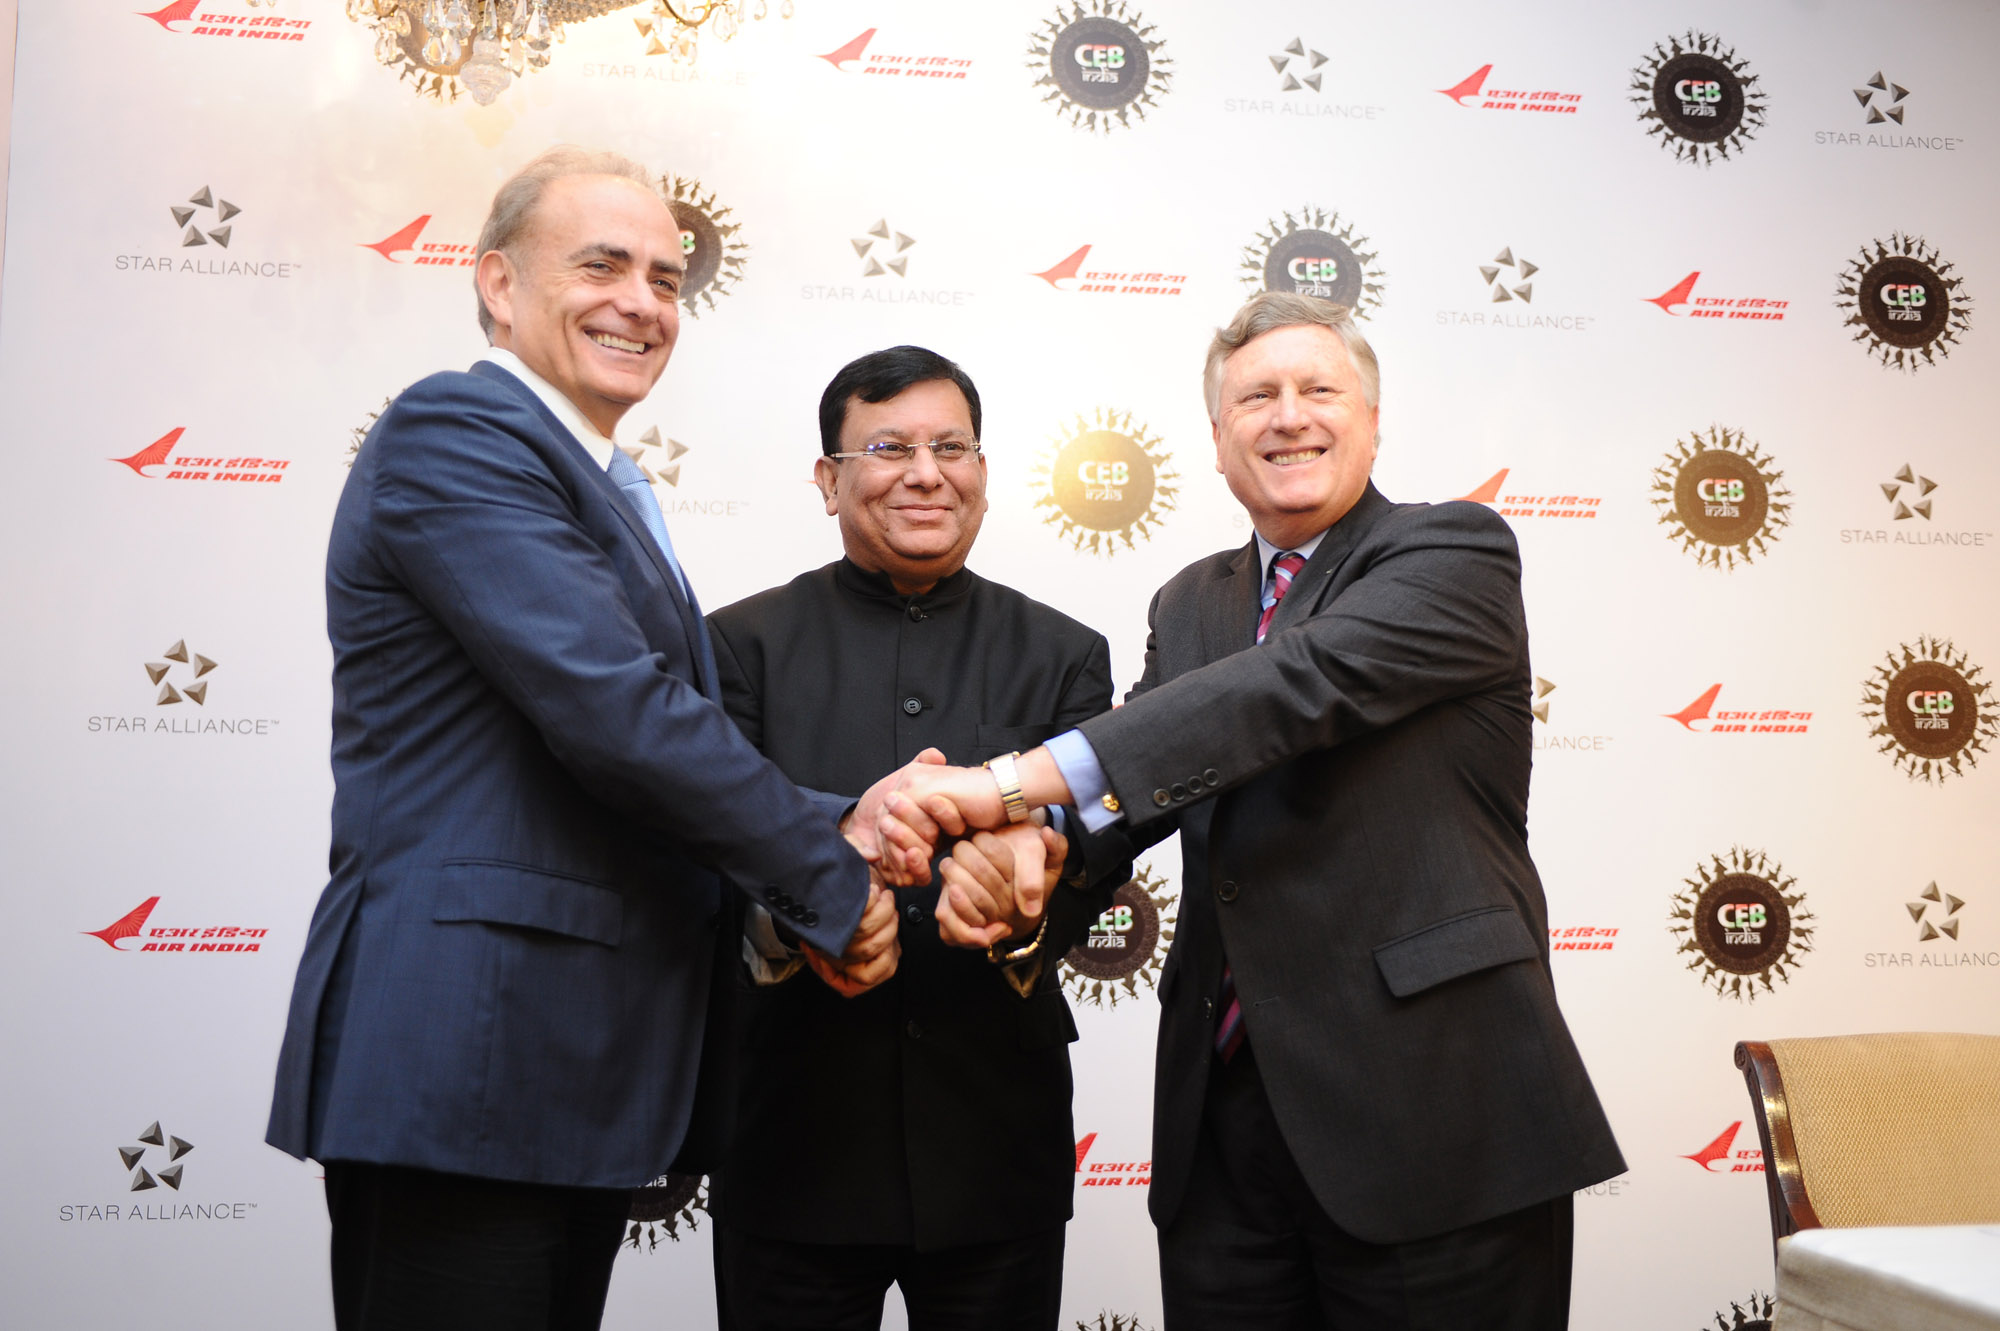 Air India hosts first Star Alliance Chief Executive Board meeting in India